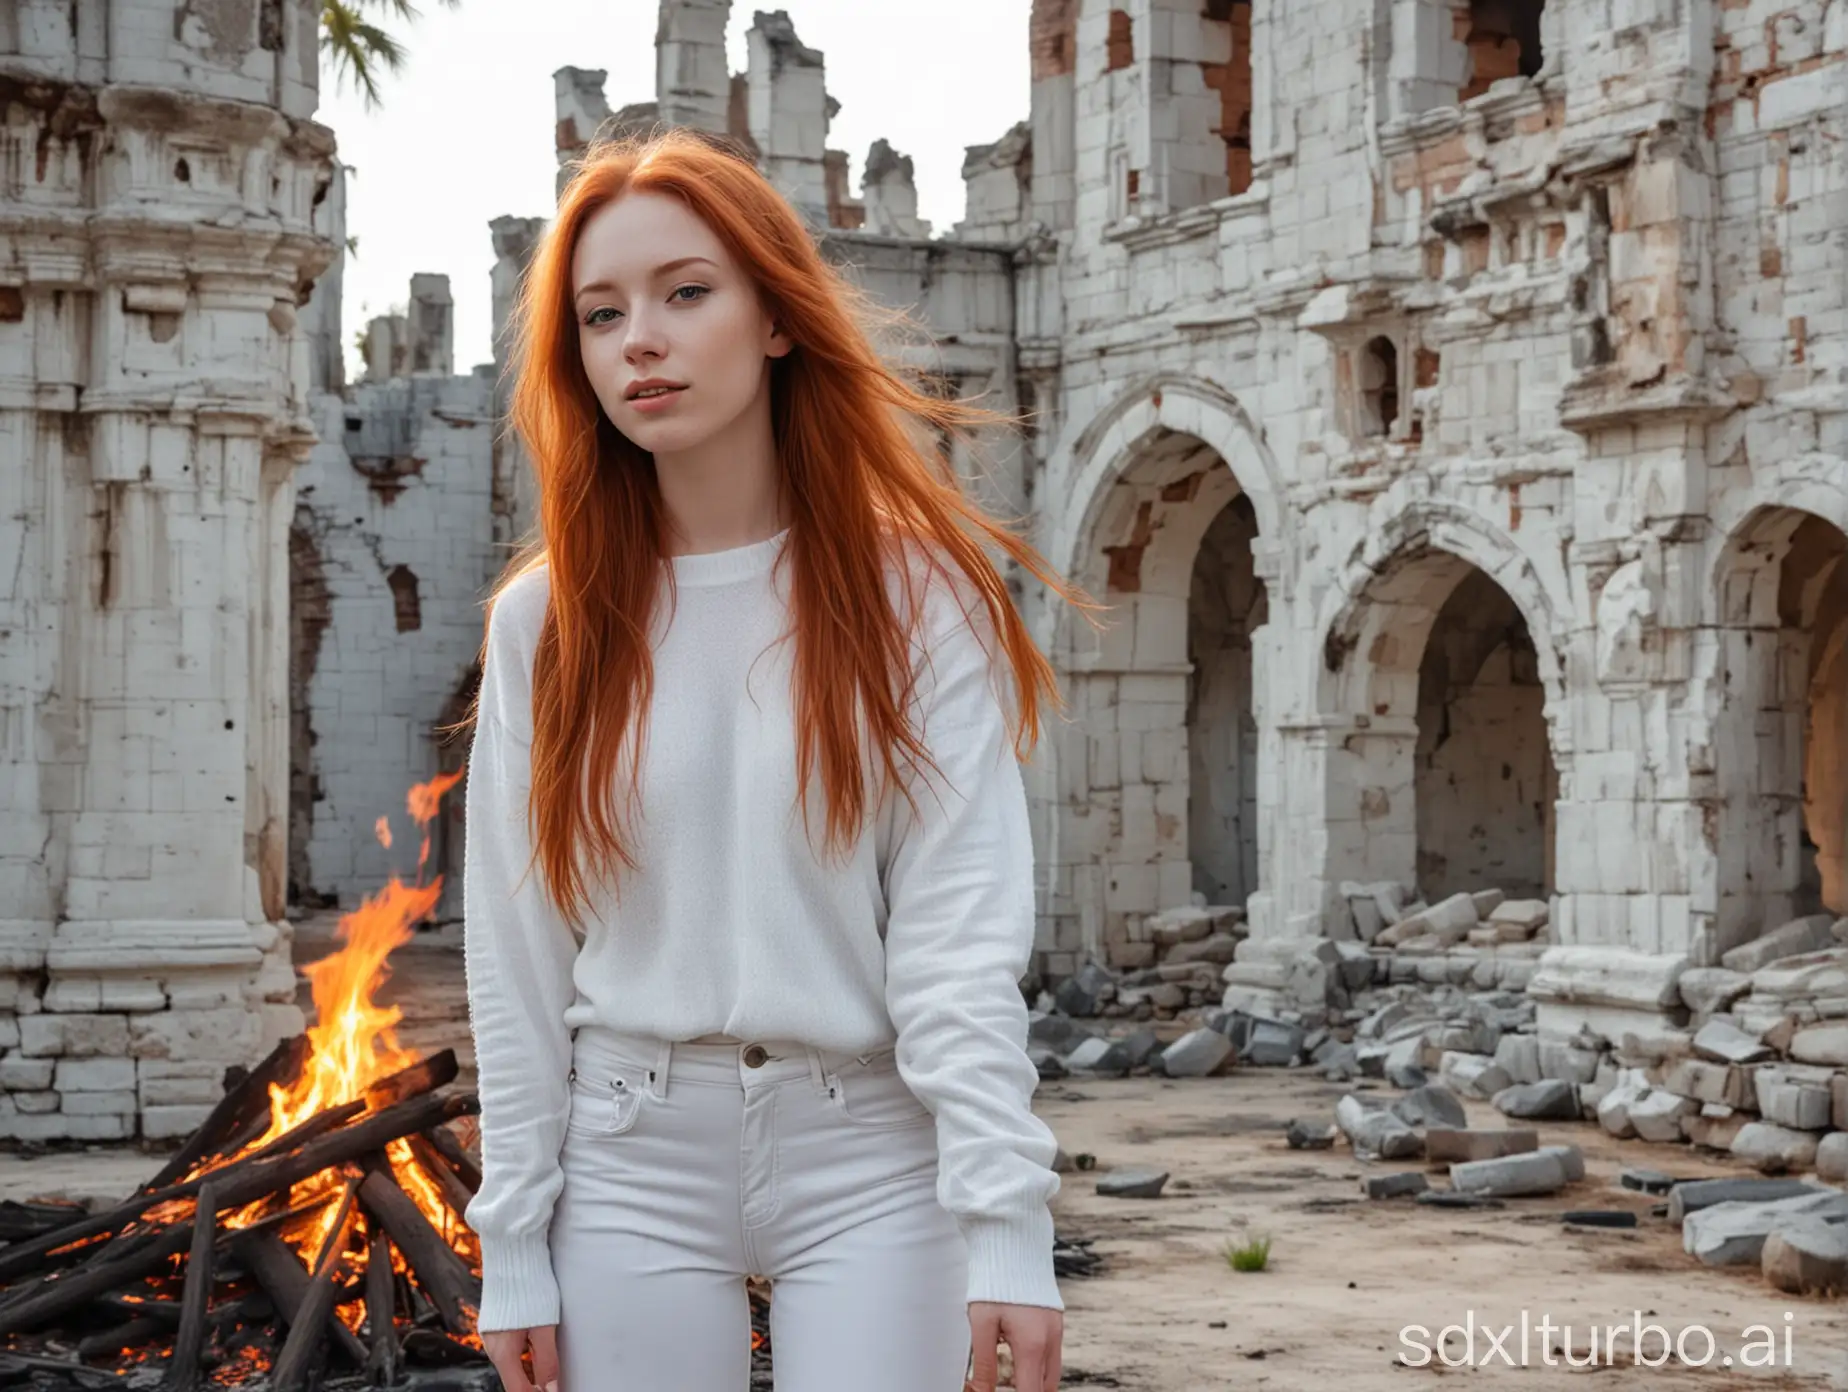 Pale-RedHaired-Girl-in-White-Attire-Amidst-Burning-Castle-Ruins